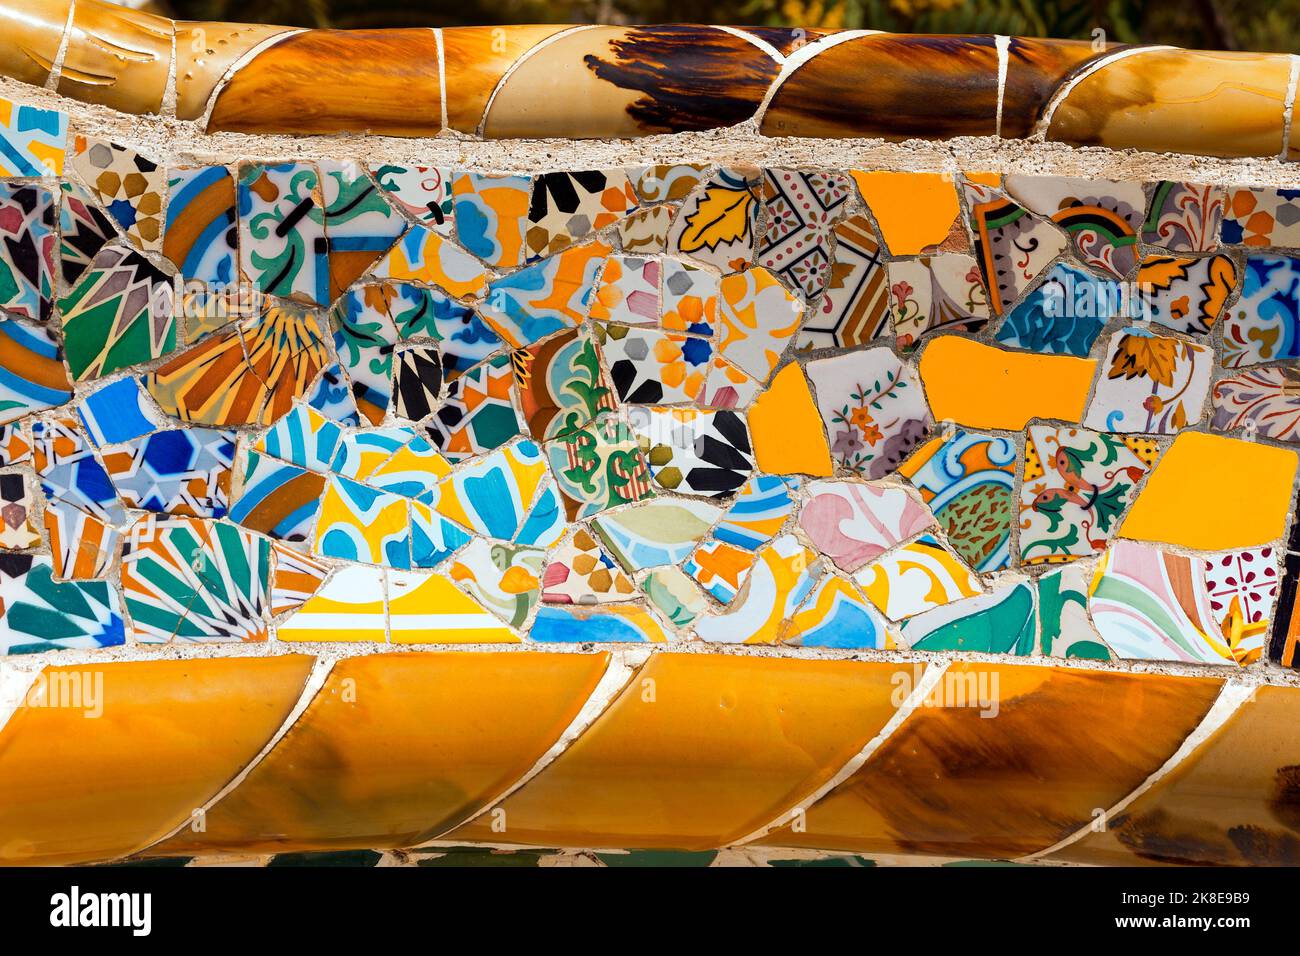 Barcelona. Detail of a ceramic bench in the Park Guell designed by the famous architect Antoni Gaudi (1852-1926). UNESCO, World Heritage Site. Stock Photo